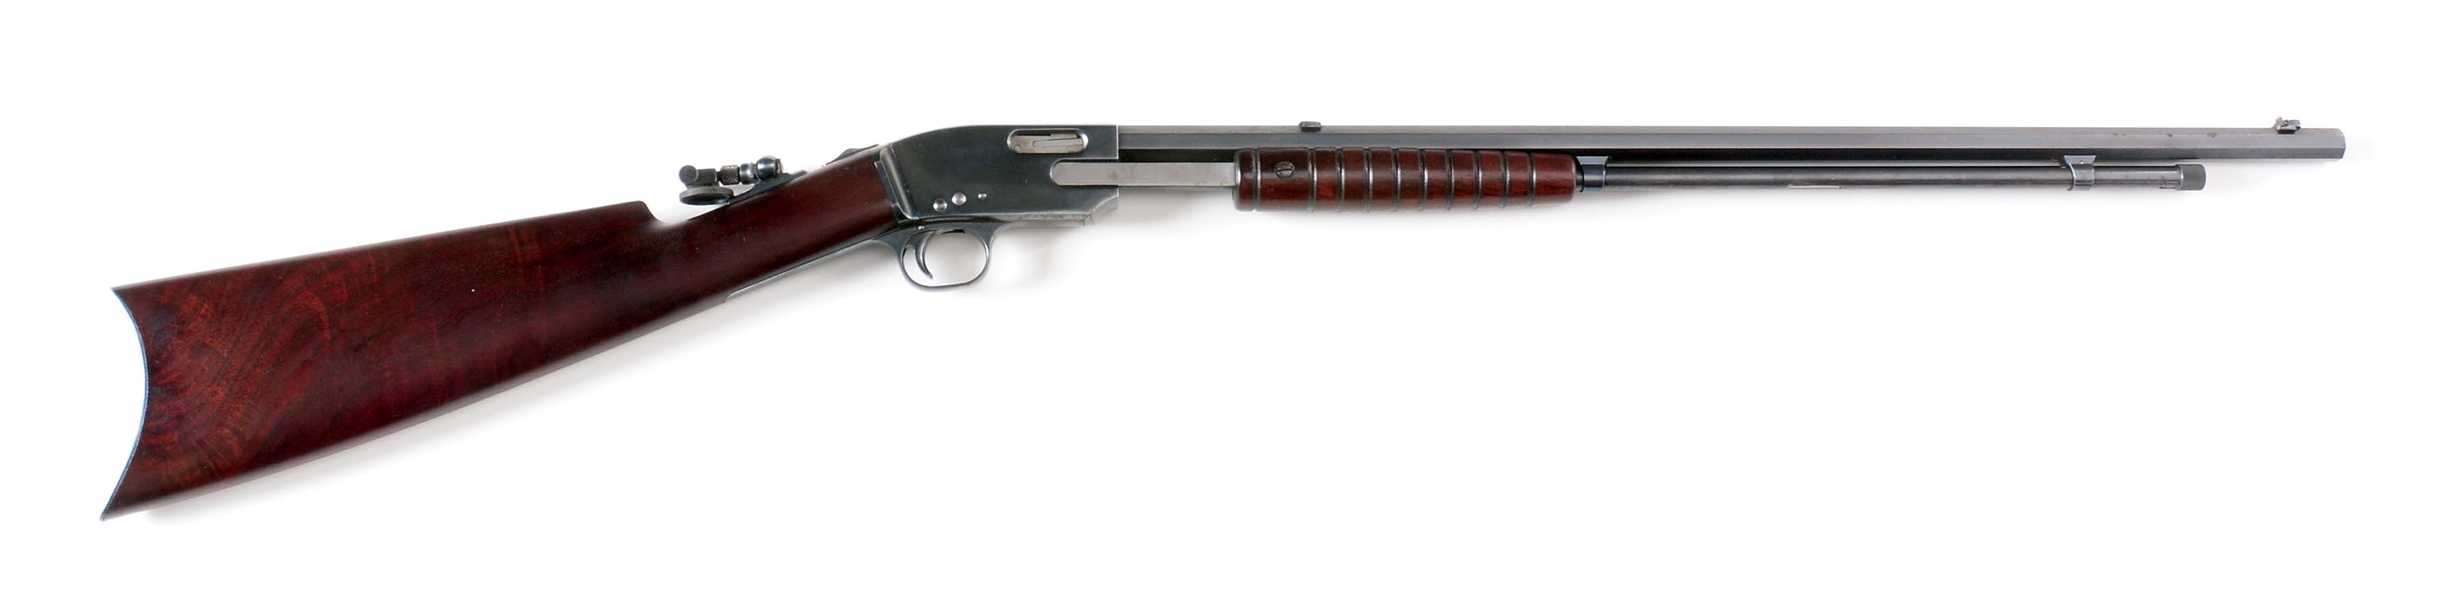 (C) FINE MERIDEN ARMS MODEL 15 .22 PUMP ACTION RIFLE, SERIAL NUMBER 3.